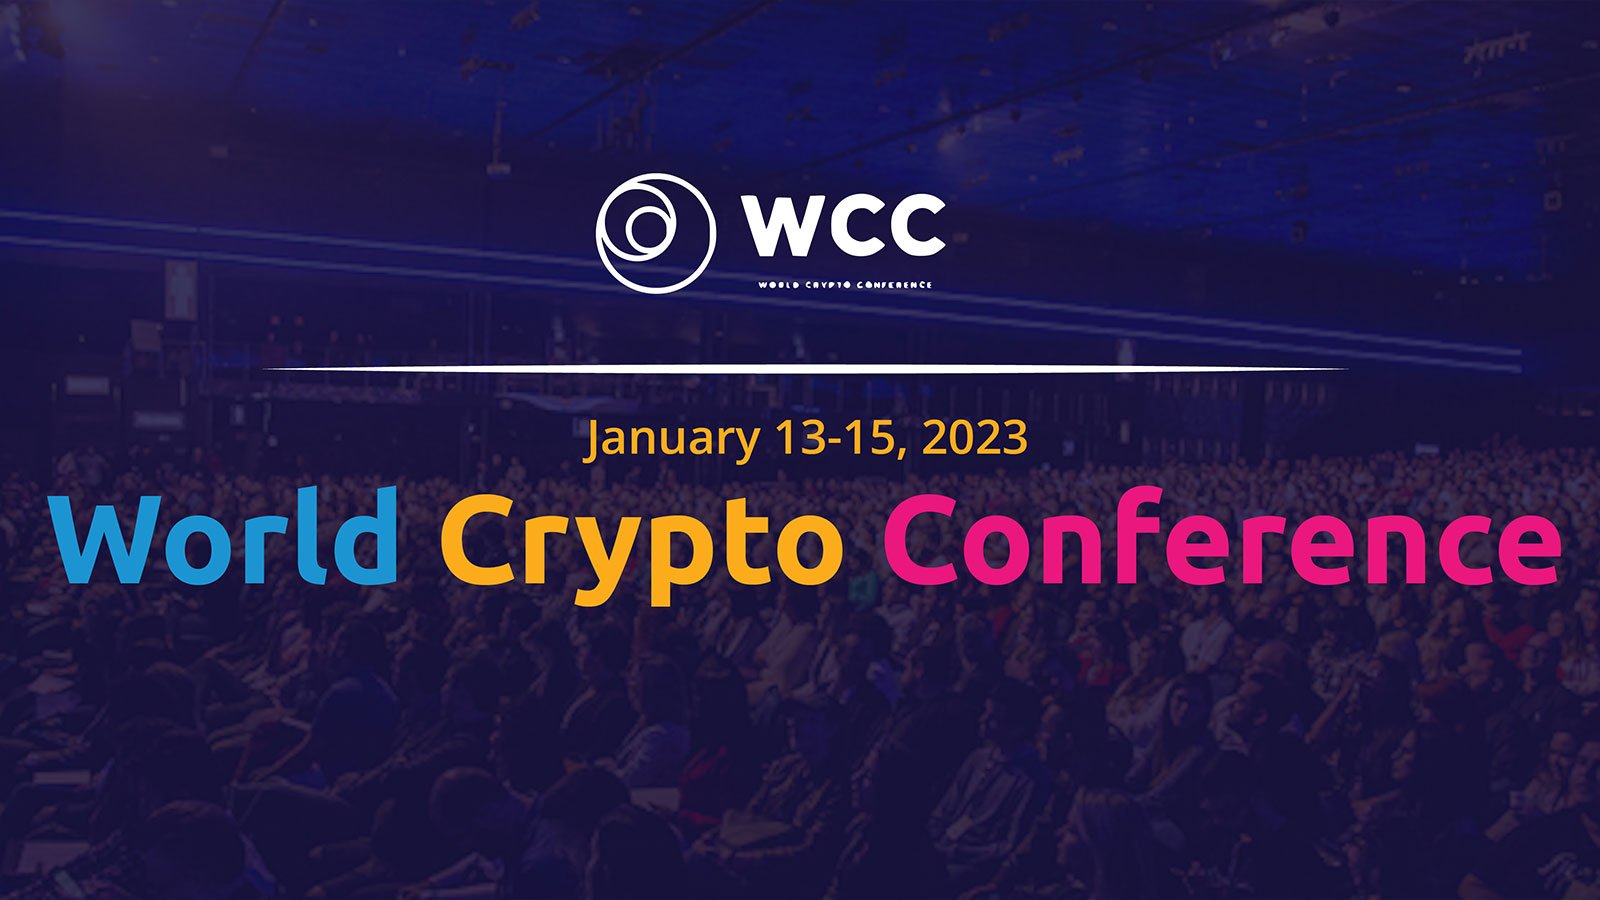 World Crypto Conference 2023 for the First Time Held in Zurich, Switzerland